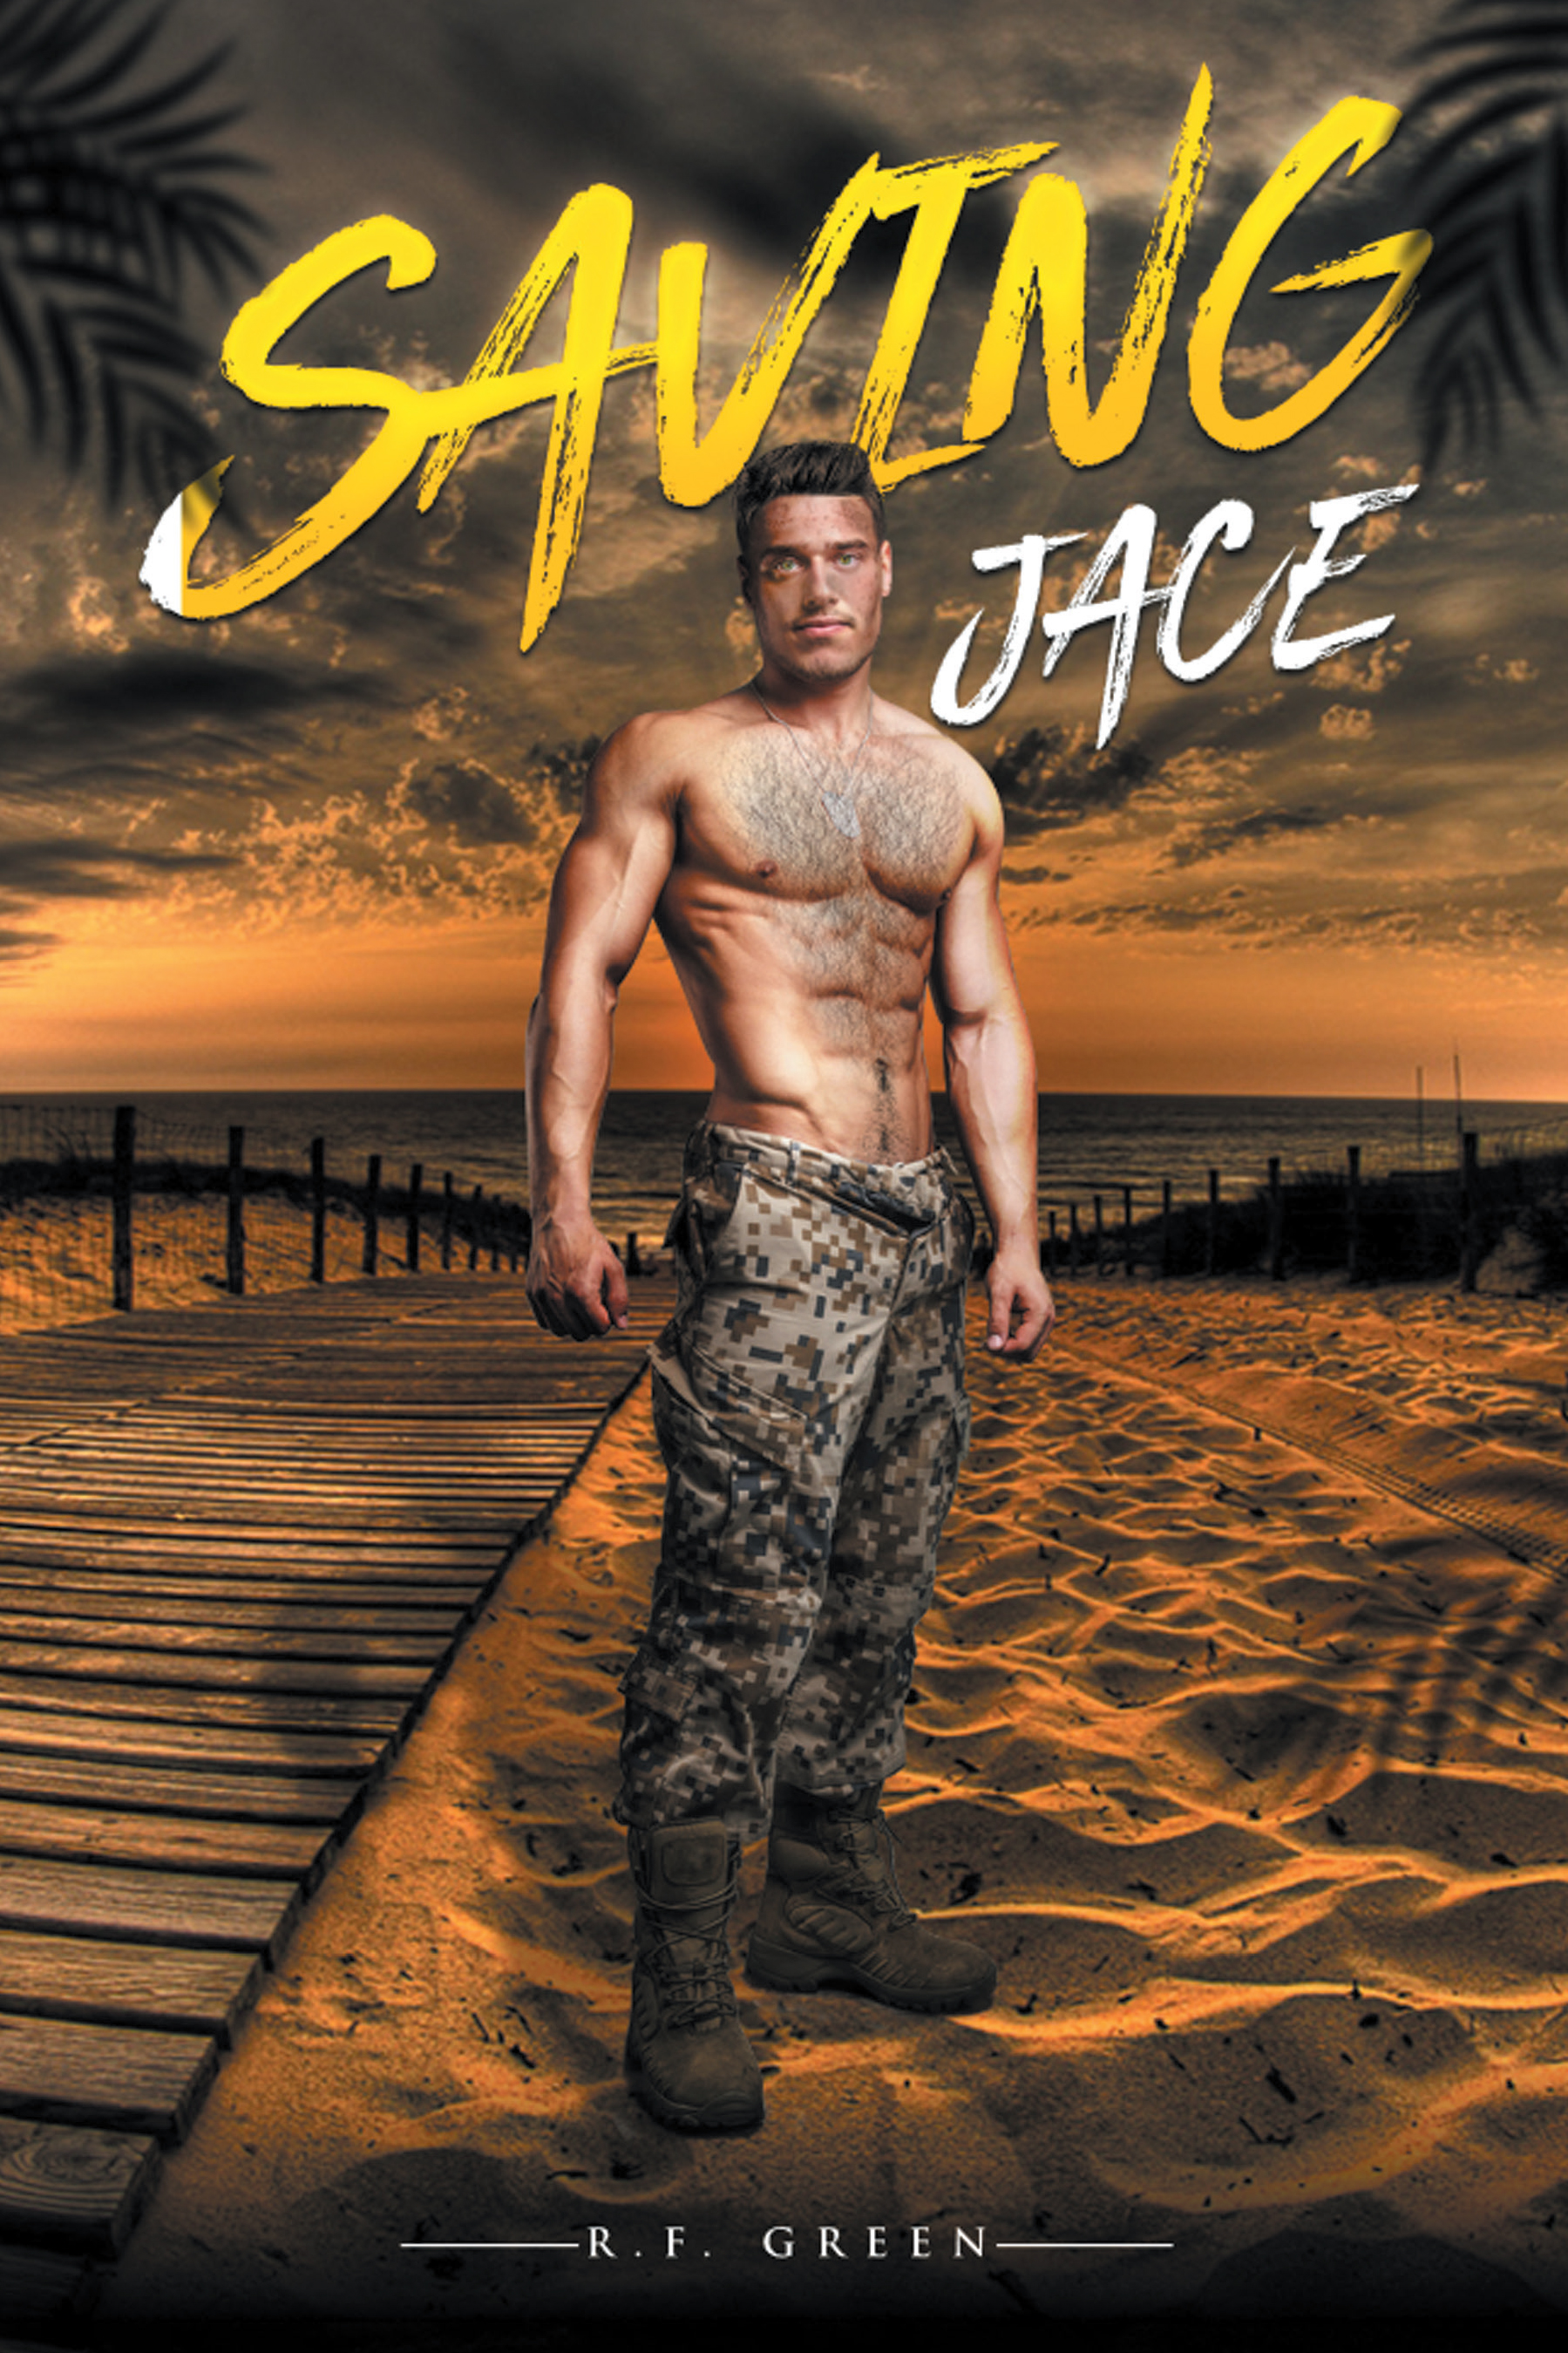 Author R. F. Green’s New Book, "Saving Jace," is an Enthralling Romance That Follows Two Lovers Who Must Trust in Each Other and Their Love to Overcome the Odds